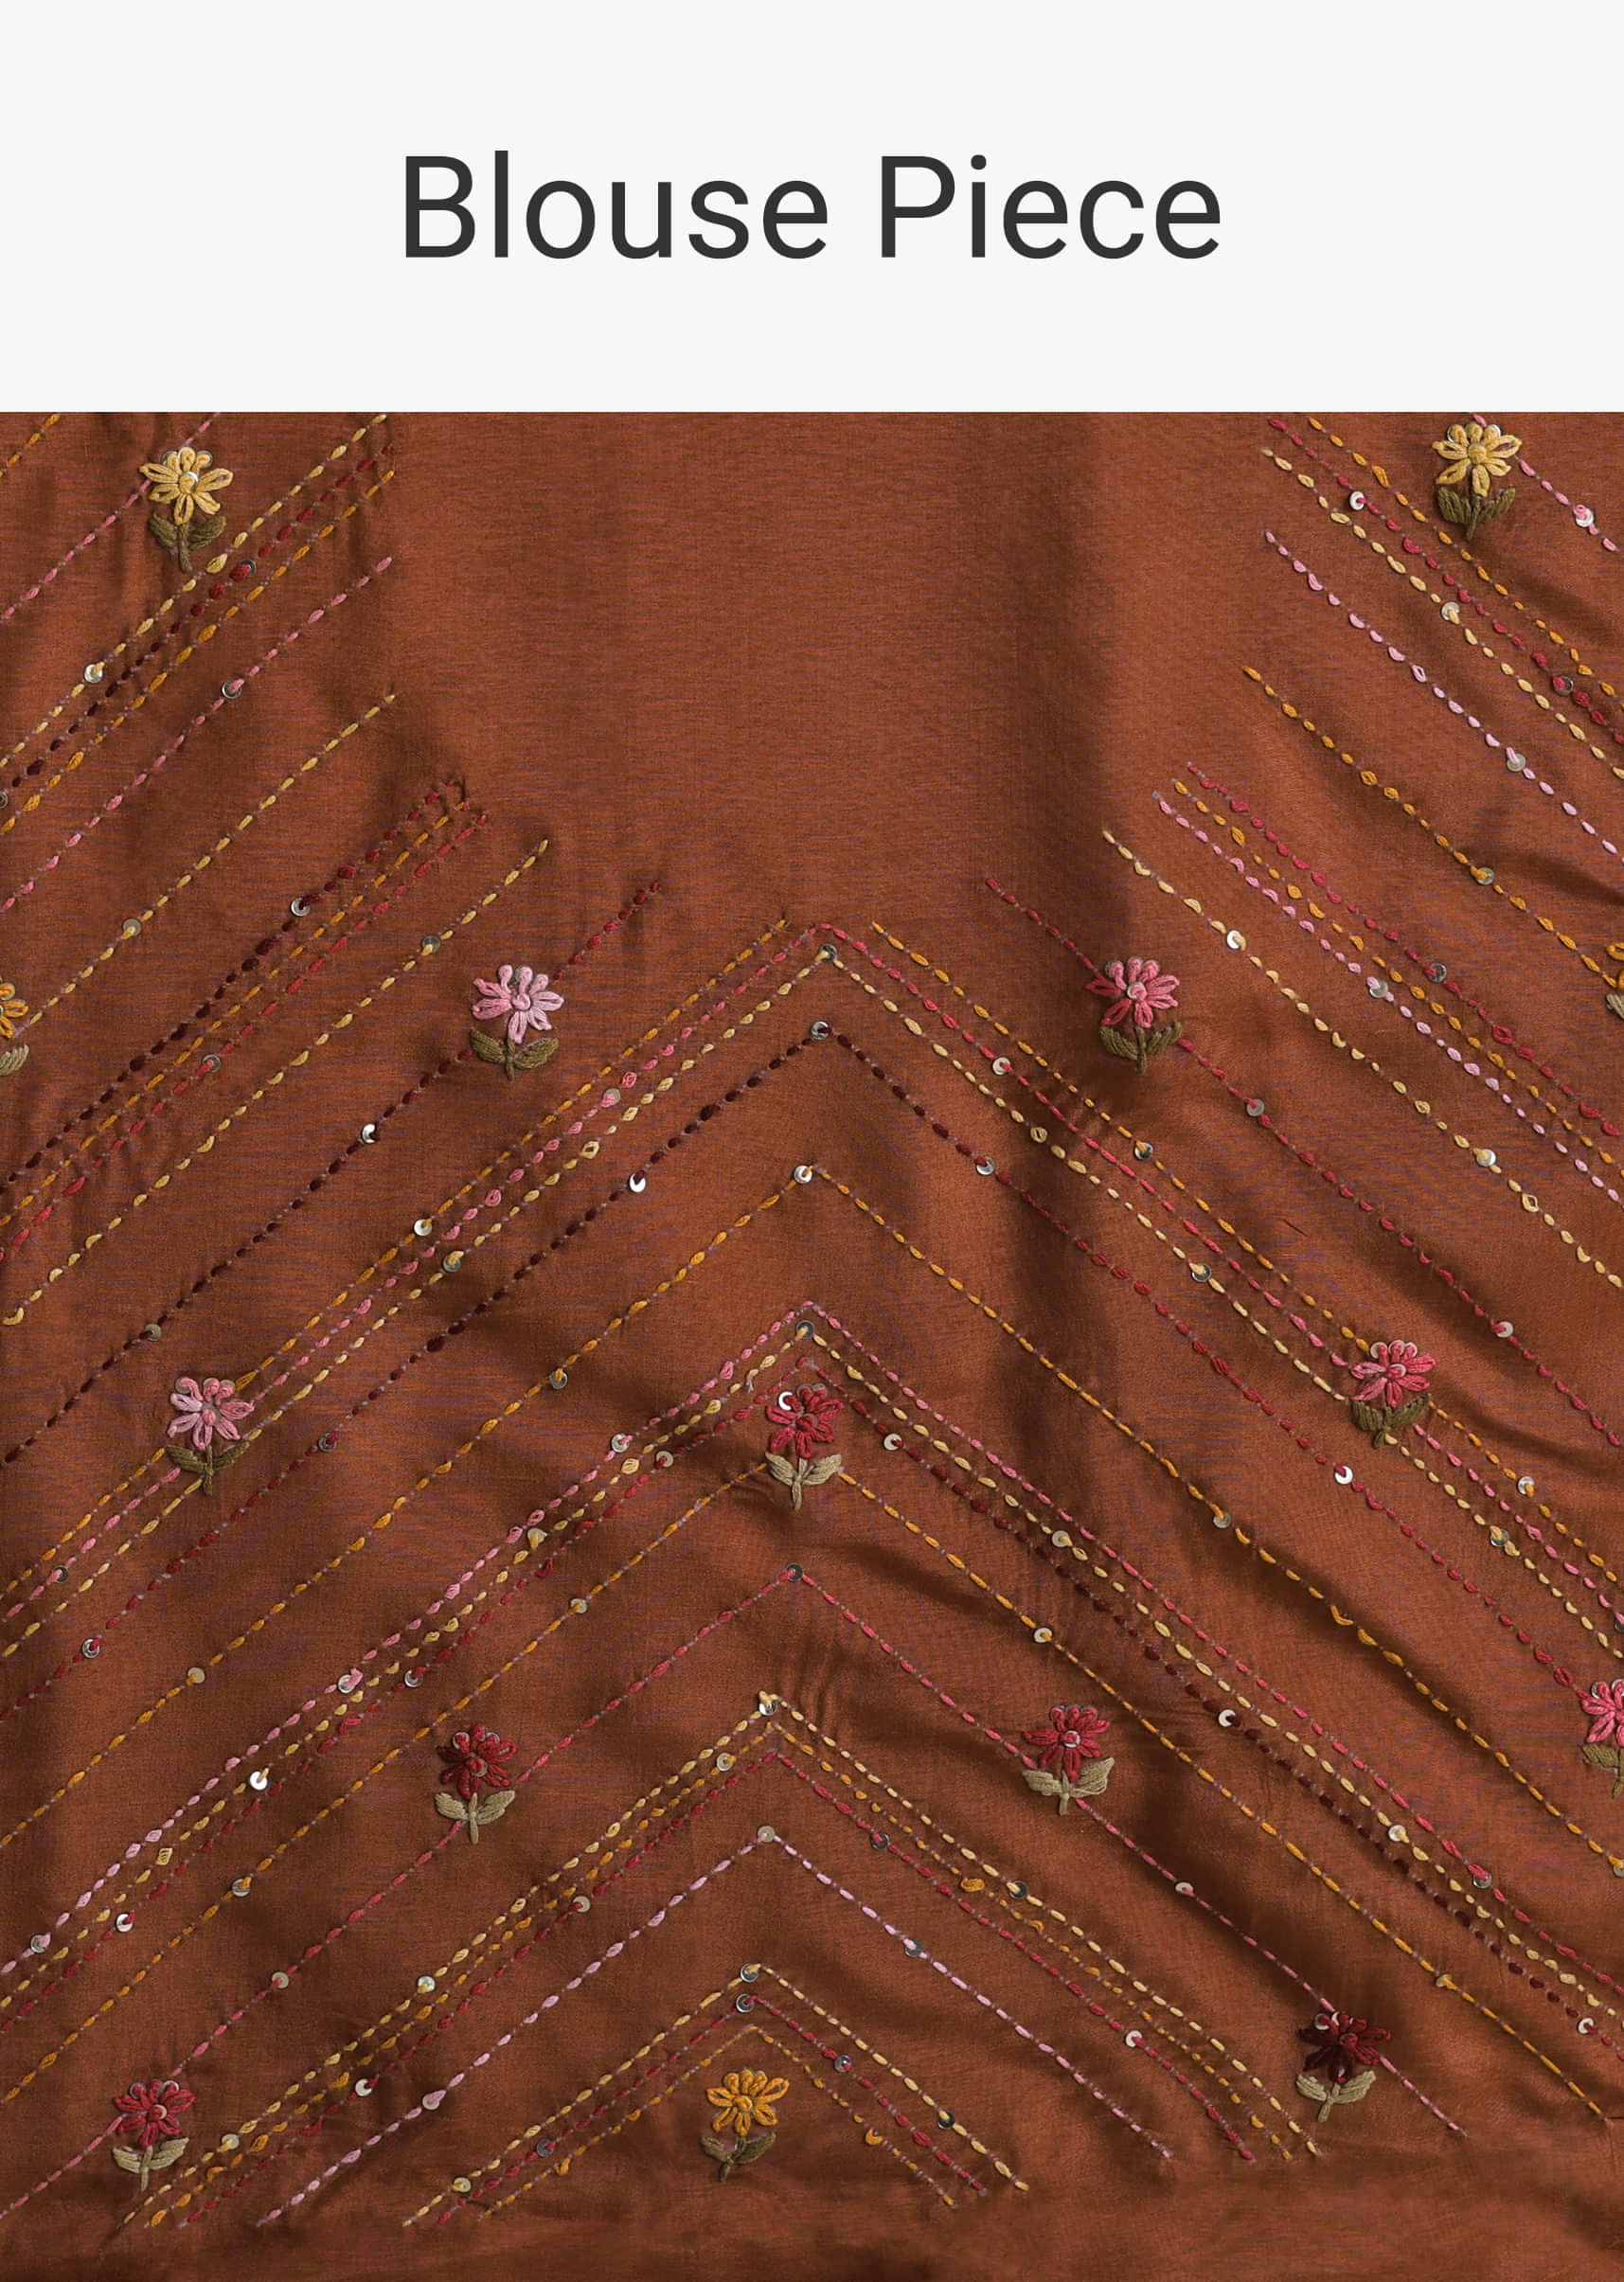 Peach And Brown Resham 3D Bud Embroidered Ombre Saree With Brocade And Thread Work In Dola Crepe